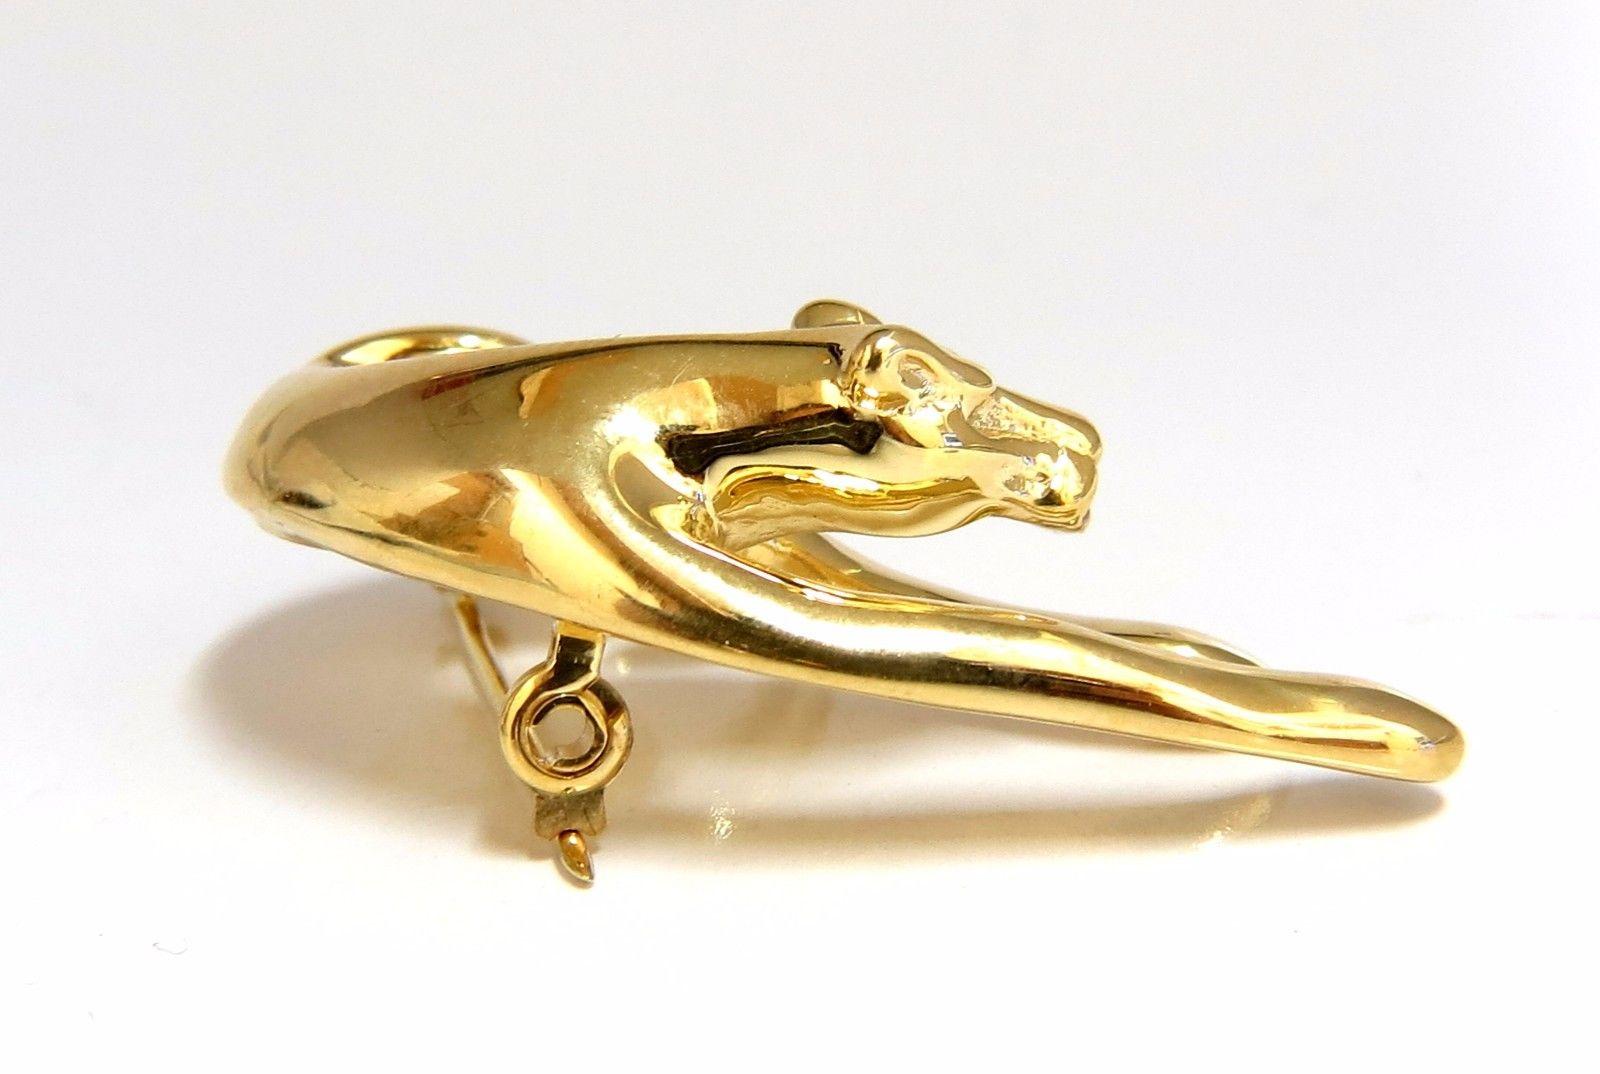 Vintage Gold Hollow pin.

Resting Panther /  Still Life 3D

New condition.

1.7 X 1.1 inch

14kt. yellow gold 

5.4 grams